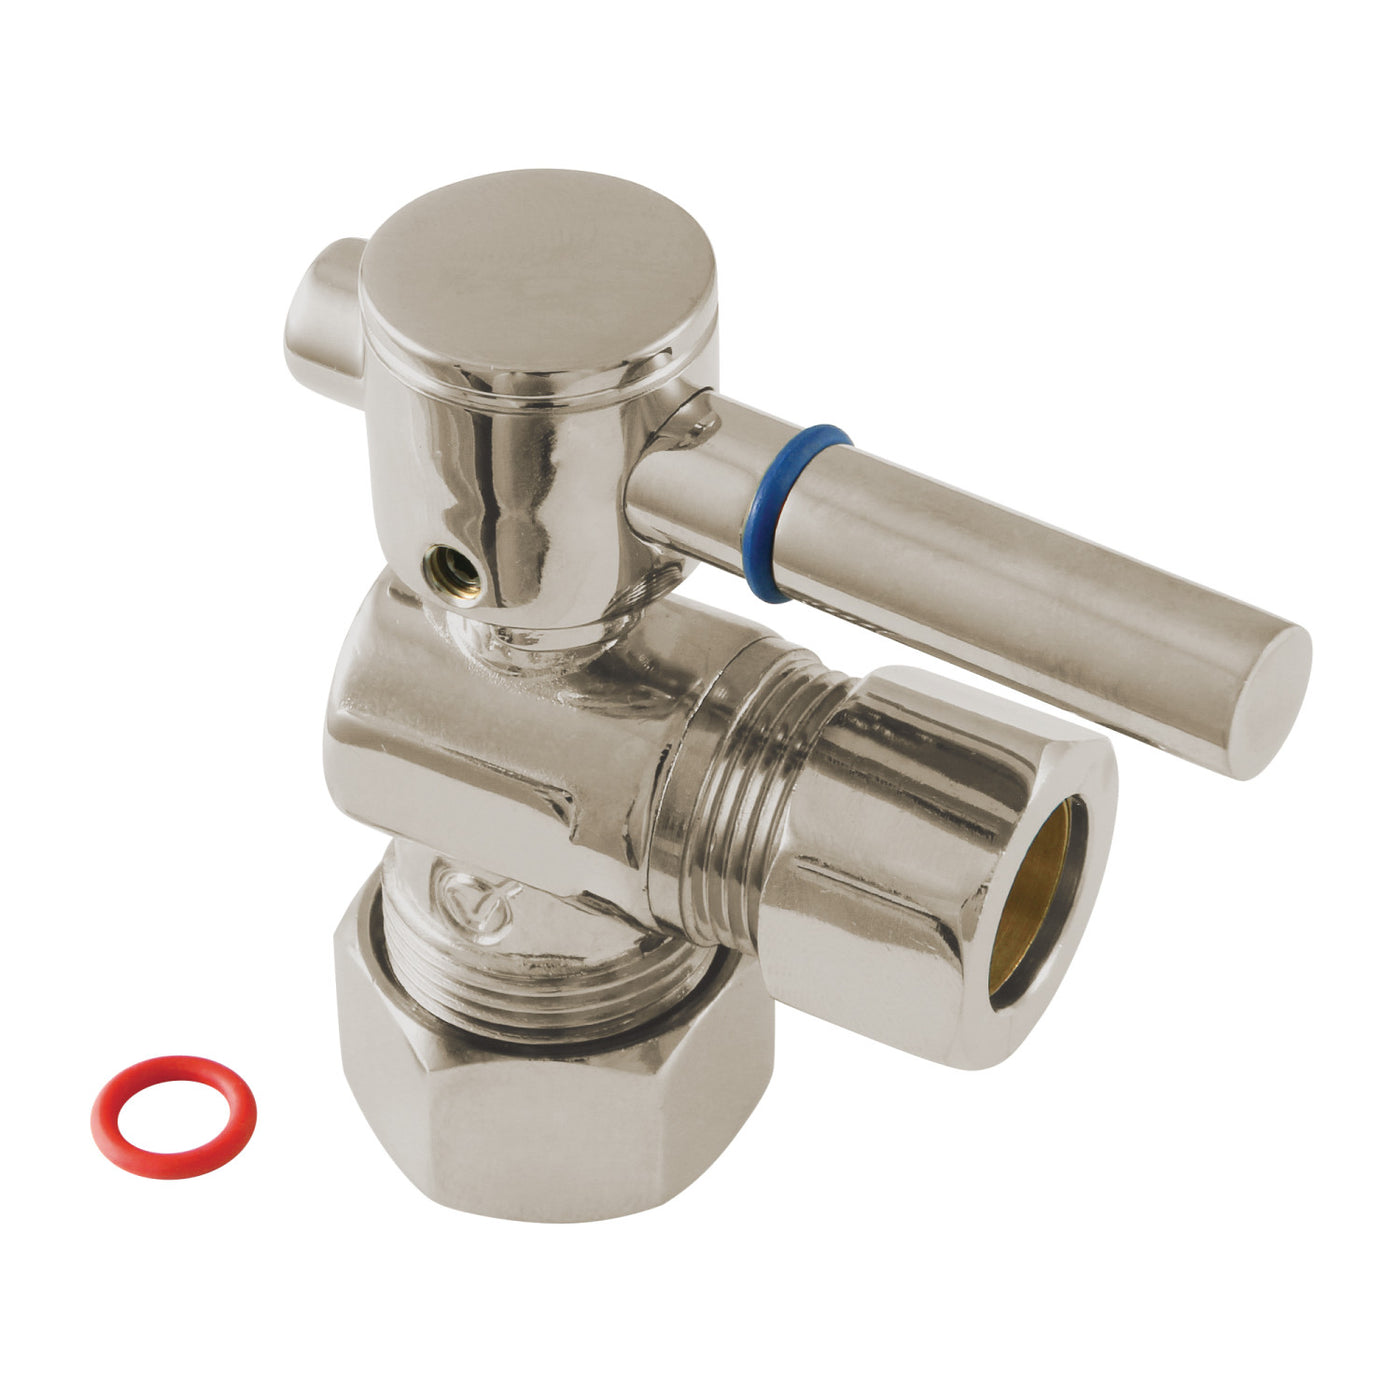 Elements of Design ECC54408DL 5/8-Inch OD Comp x 1/2-Inch OD Comp Angle Stop Valve, Brushed Nickel